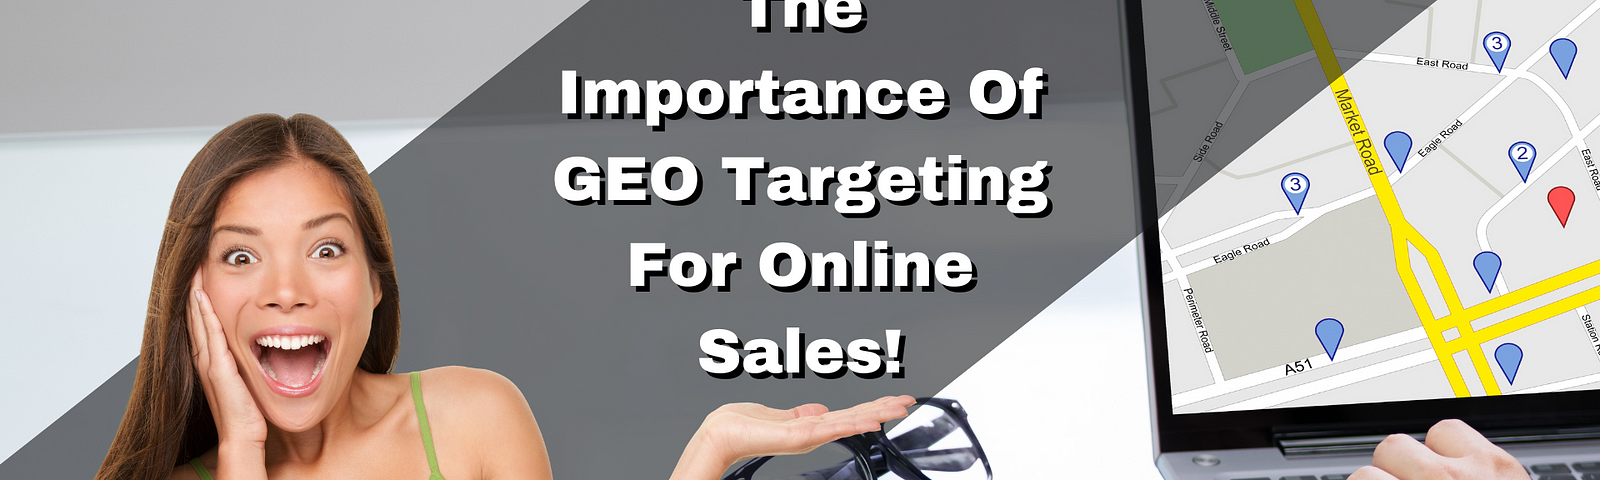 geo location quality and timing are the keys to online sales